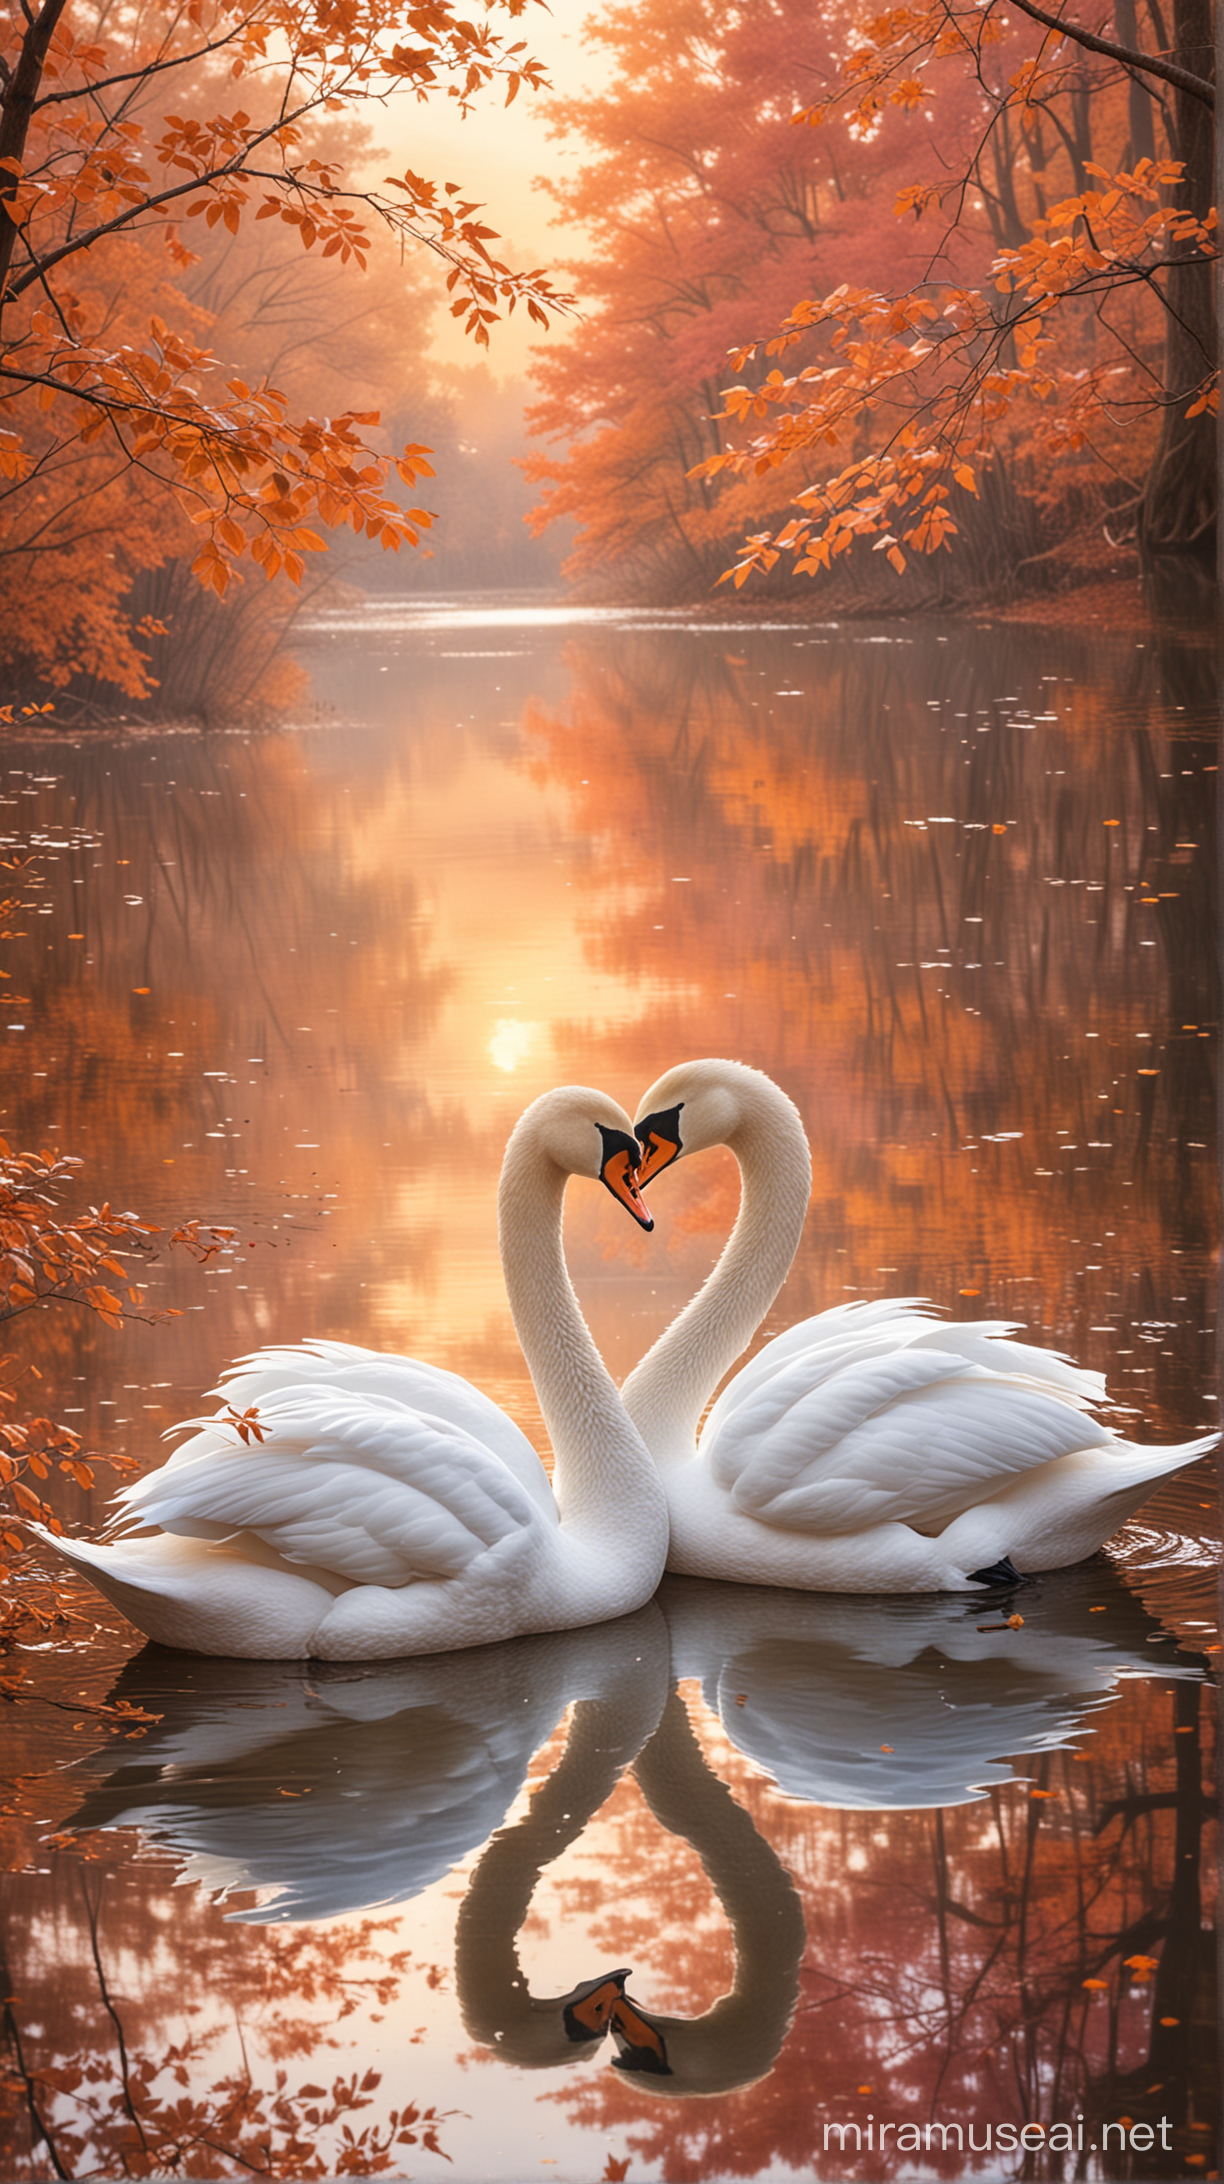 Graceful Swans in Sunset Serenity